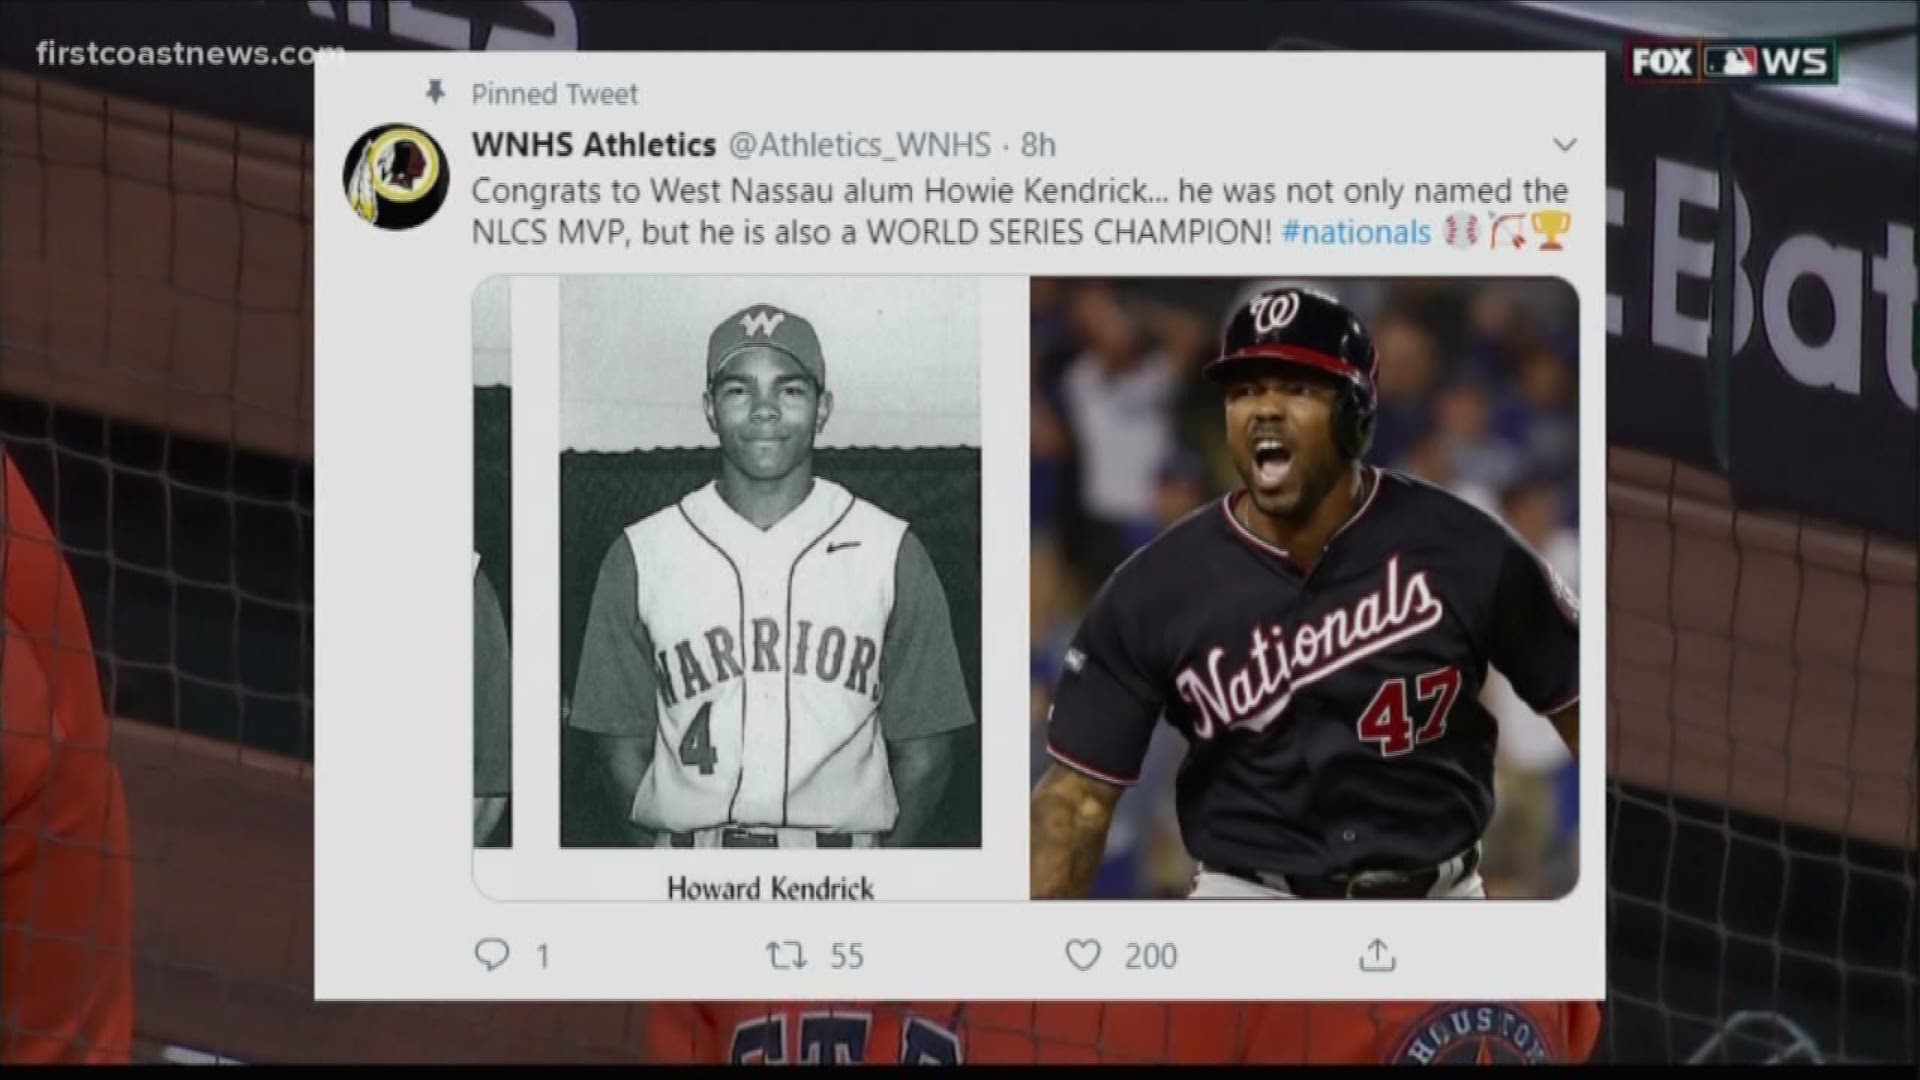 Howard 'Howie' Kendrick hit the game-winning home run in Game 7 of the World Series leading the Washington Nationals to win the first title in franchise history.